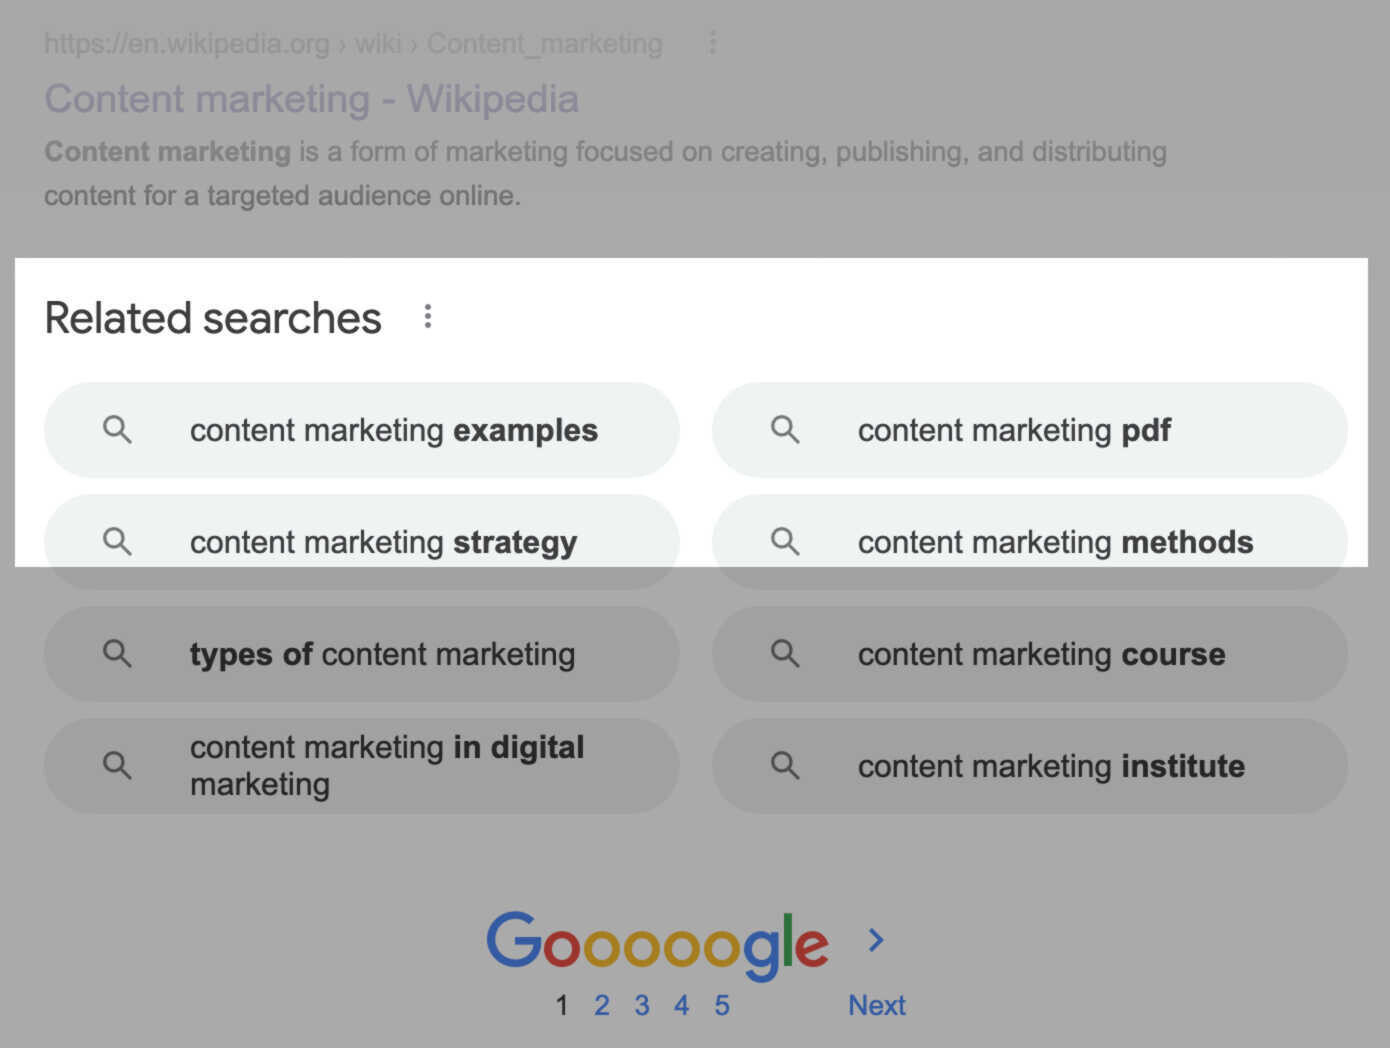 Related searches for "content marketing"